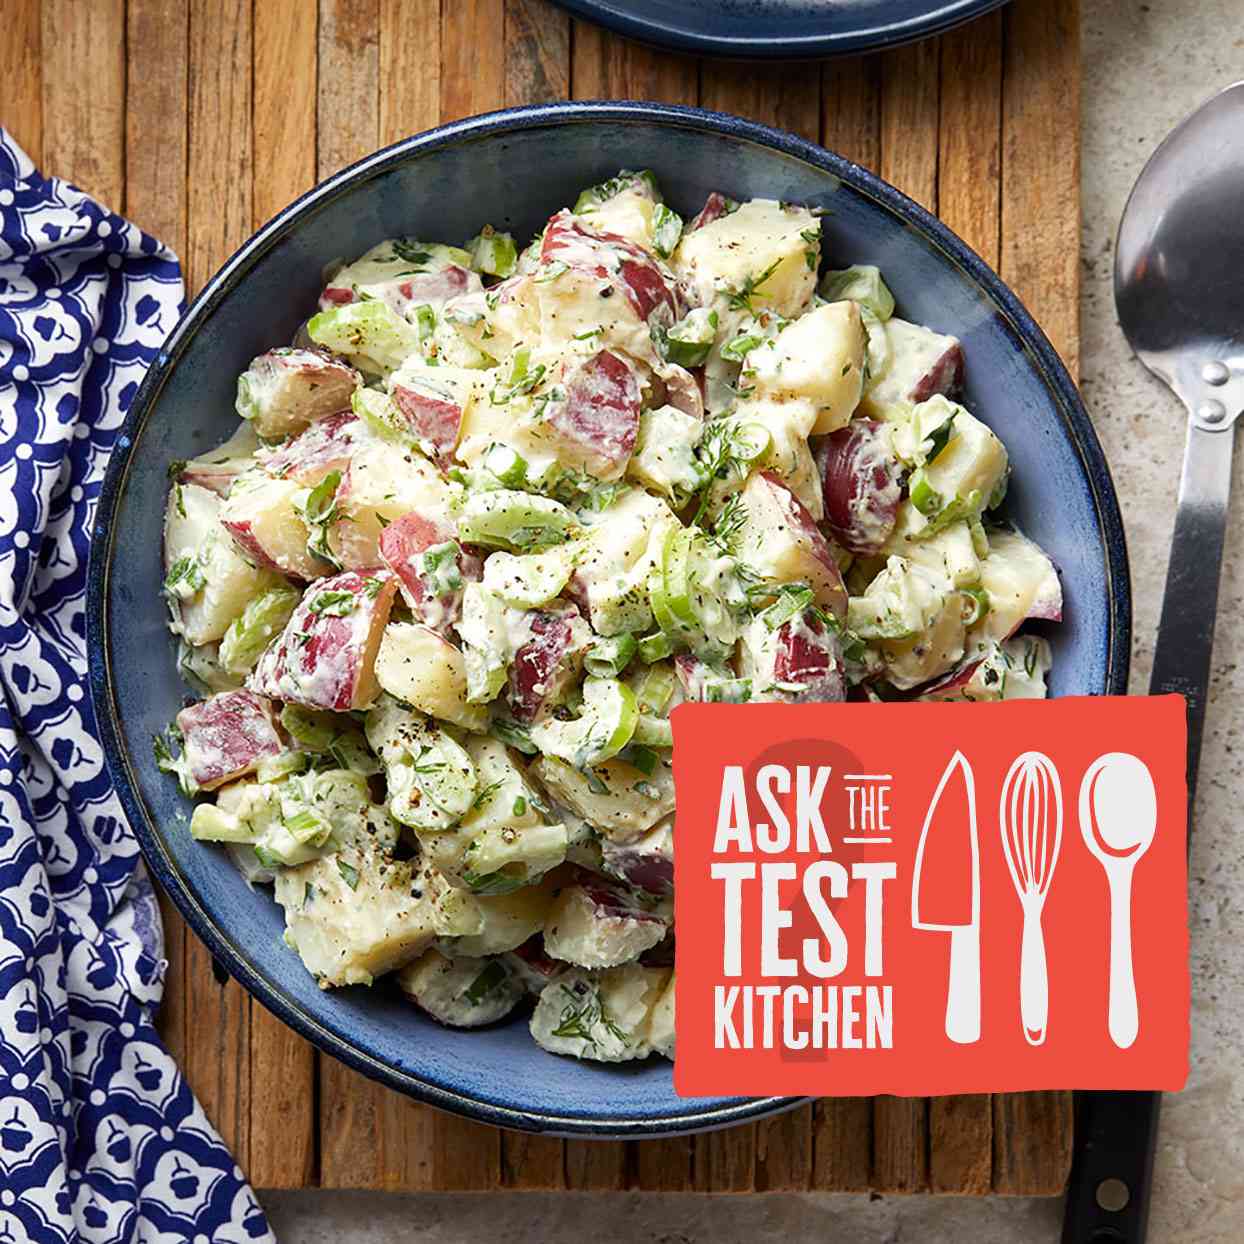 bowl of potato salad with Ask the Test Kitchen logo